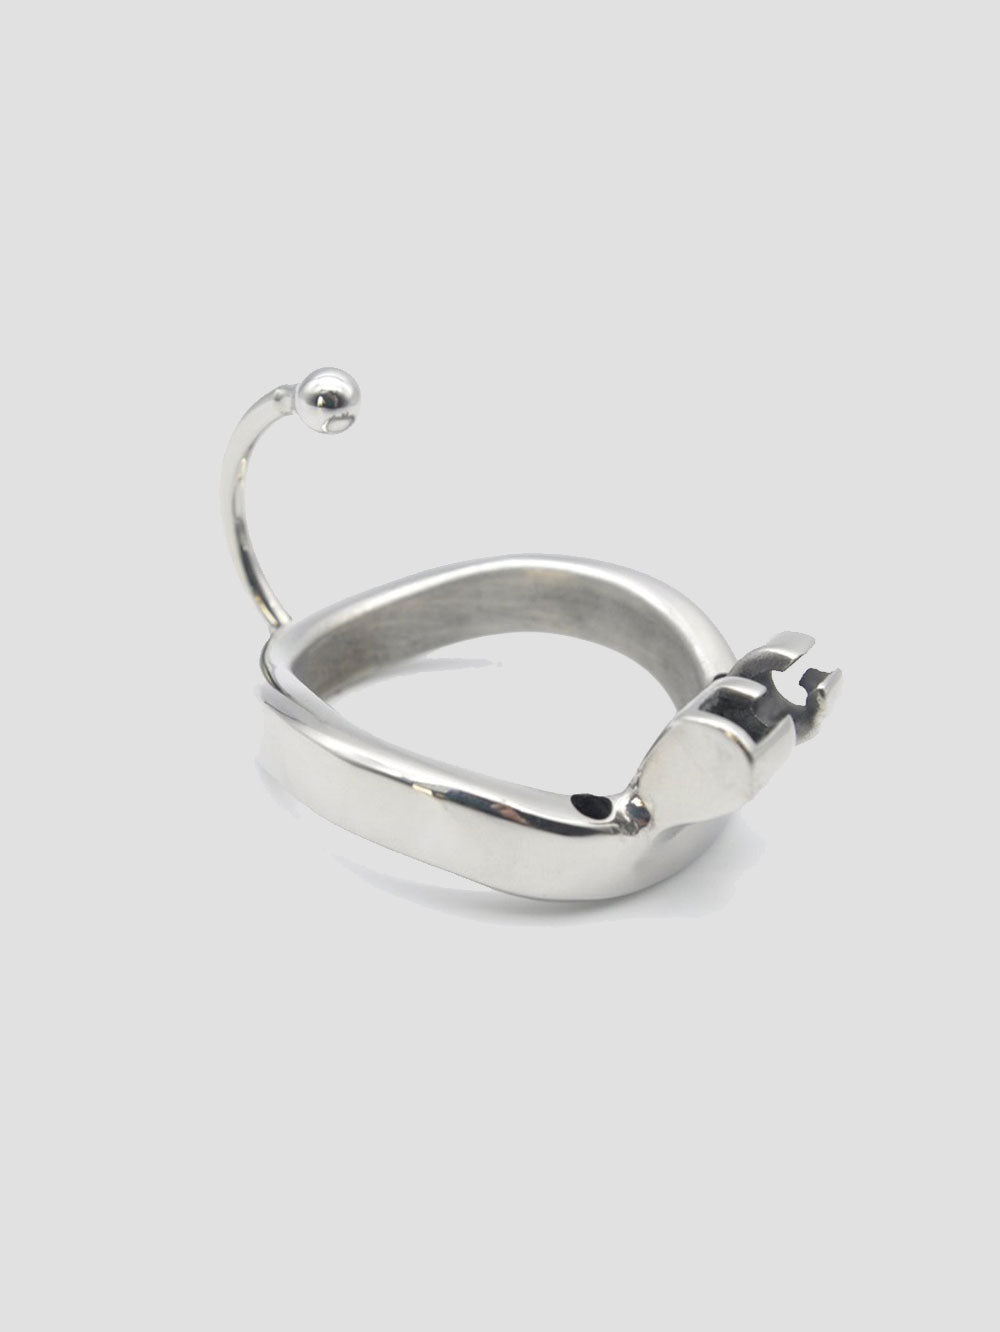 A spare chastity cage ring